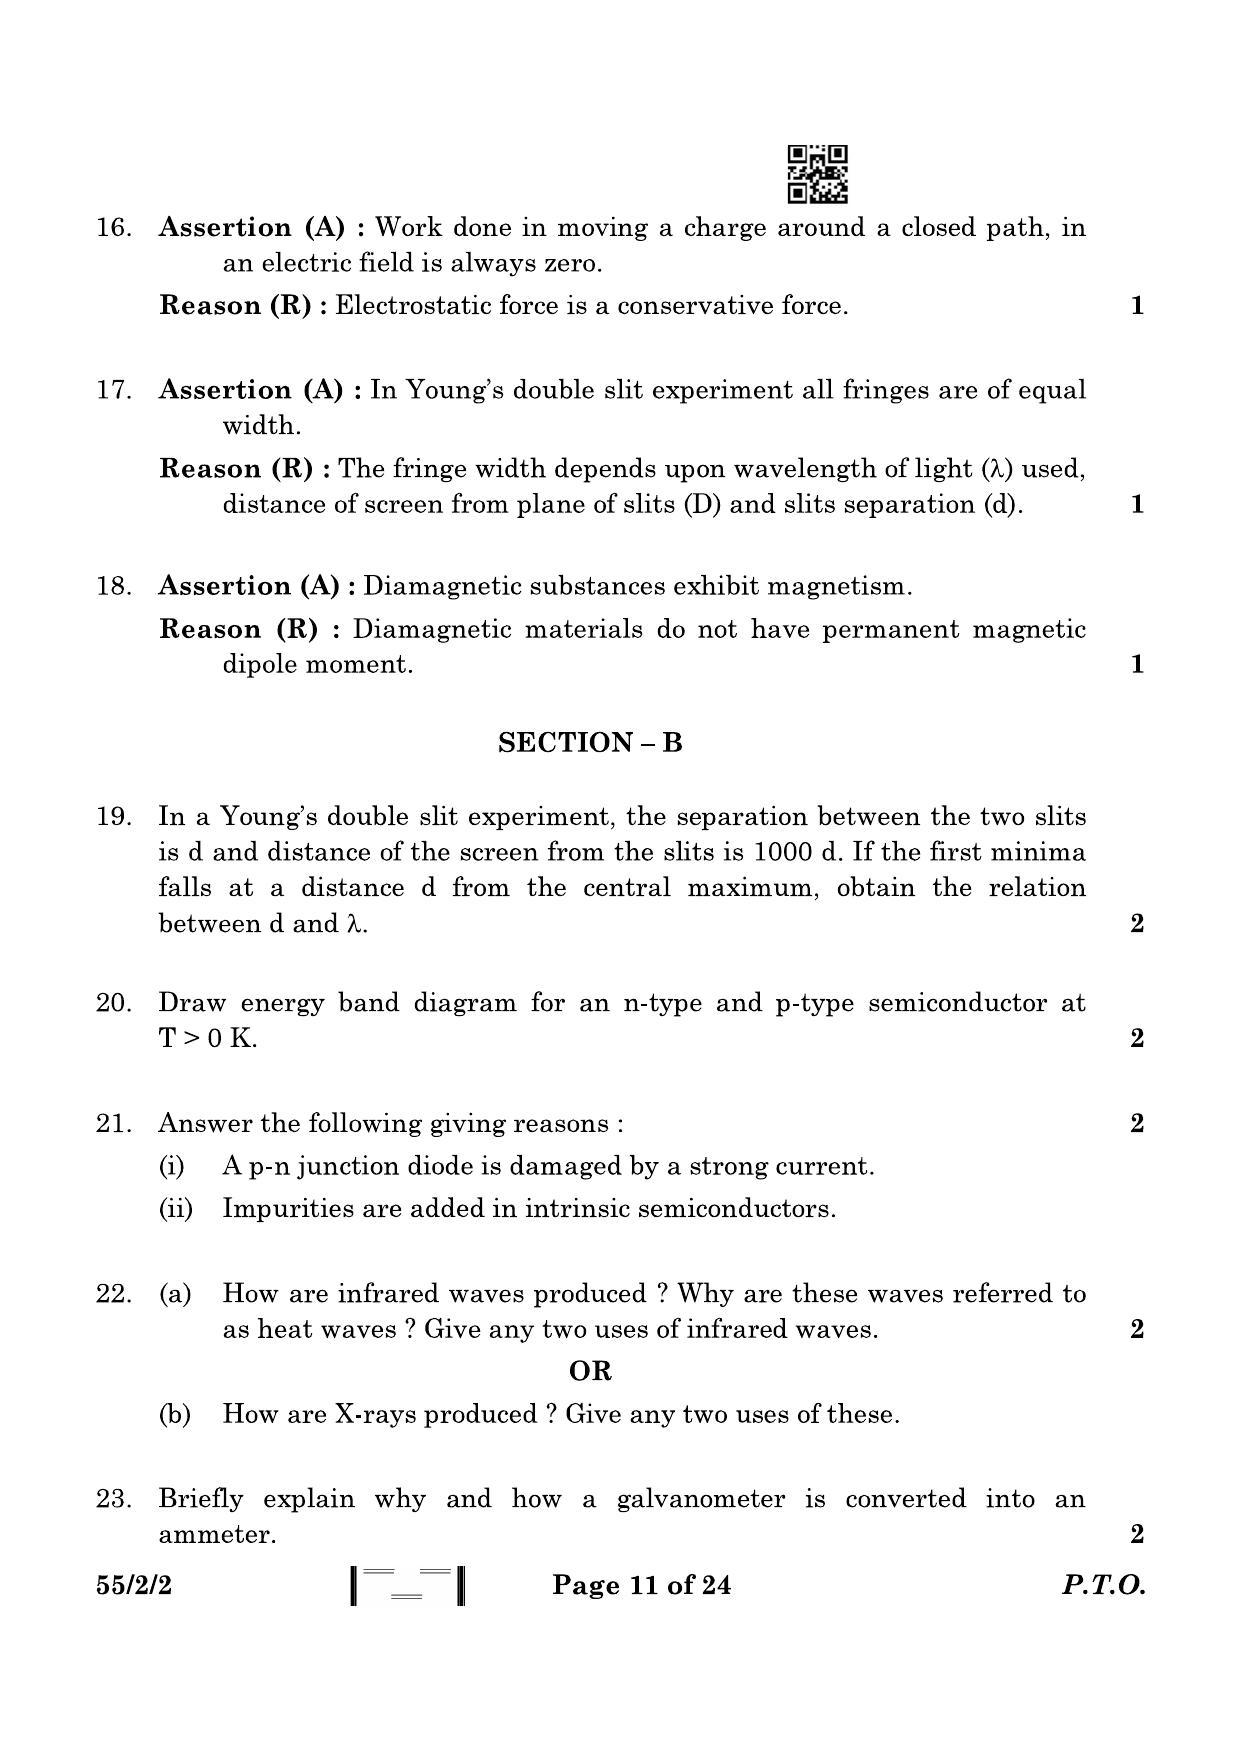 CBSE Class 12 55-2-2 Physics 2023 Question Paper - Page 11